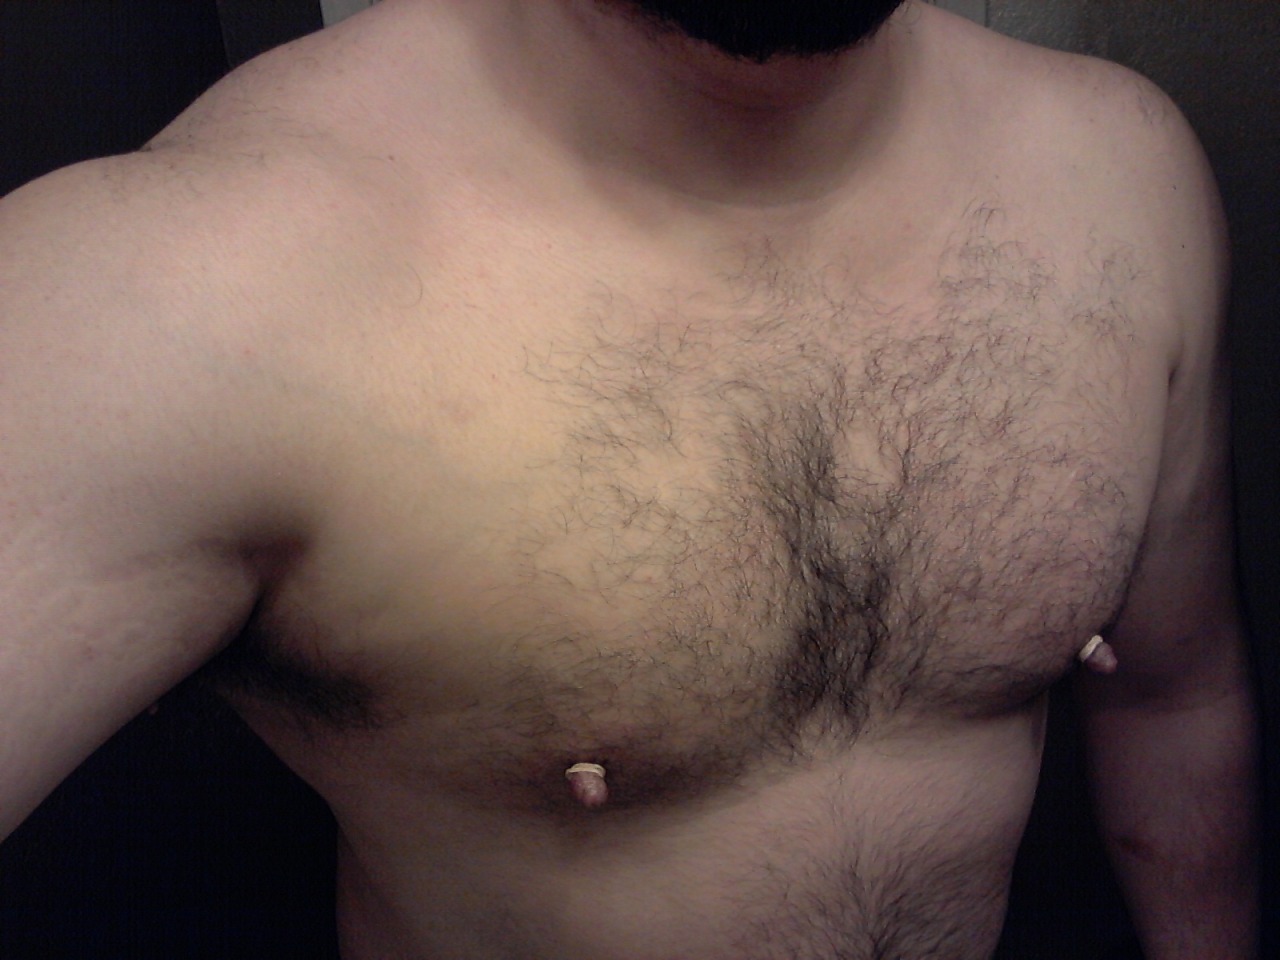 grumpyface:  Welp..  guess I’m officially into nipple pumping and binding.  (I